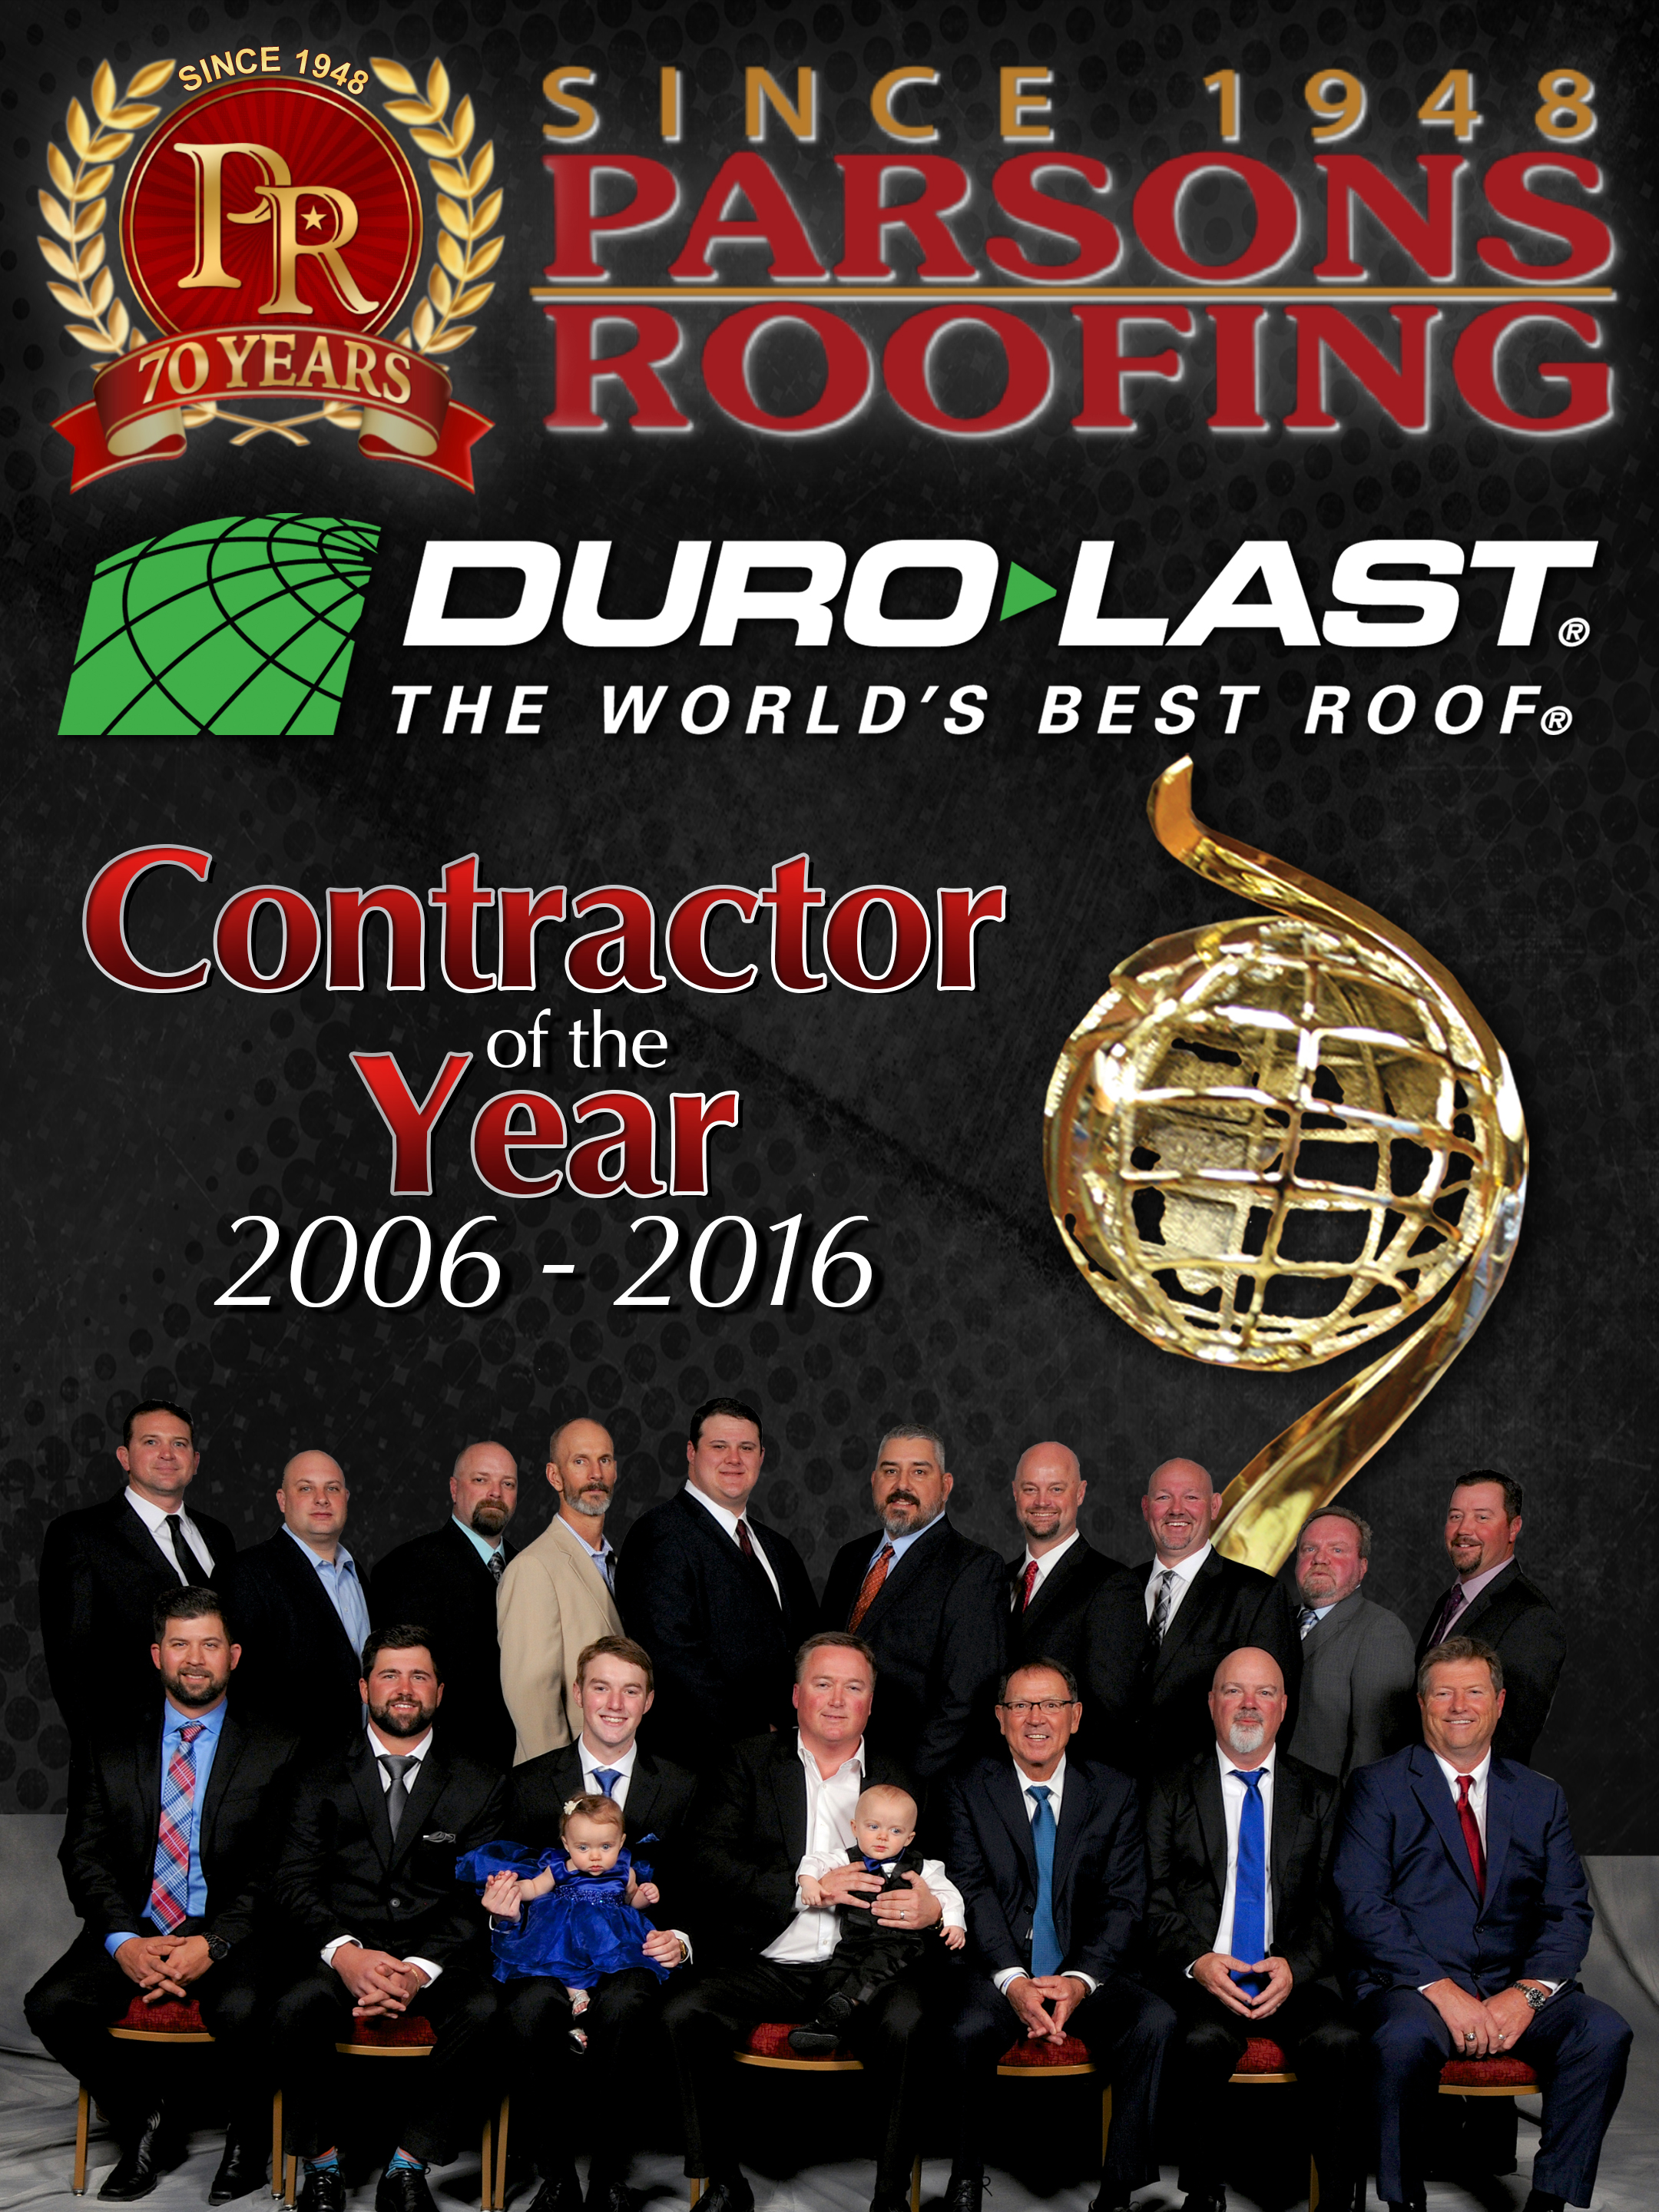 Duro-Last Contractor of the Year 2016 - Parsons Roofing